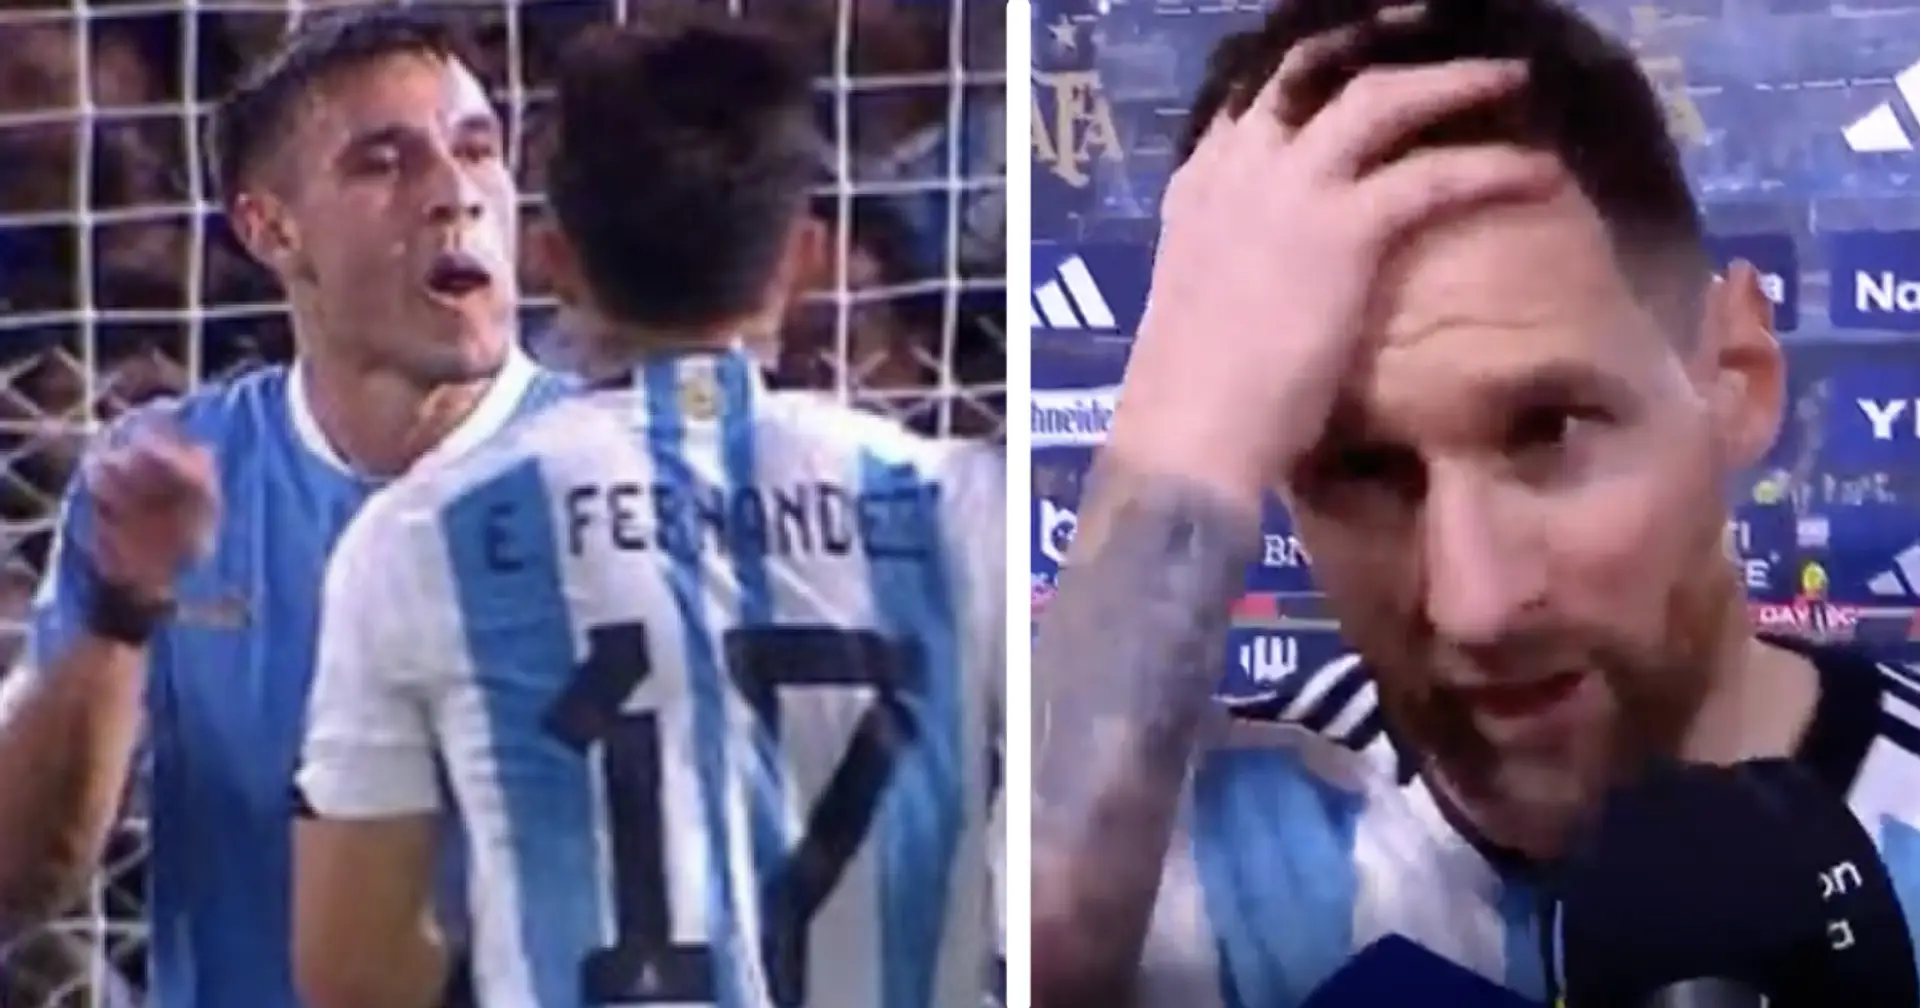 'I'd rather not say what I really think': Messi reacts as Uruguay midfielder calls De Paul Leo's 'cocksu**er'